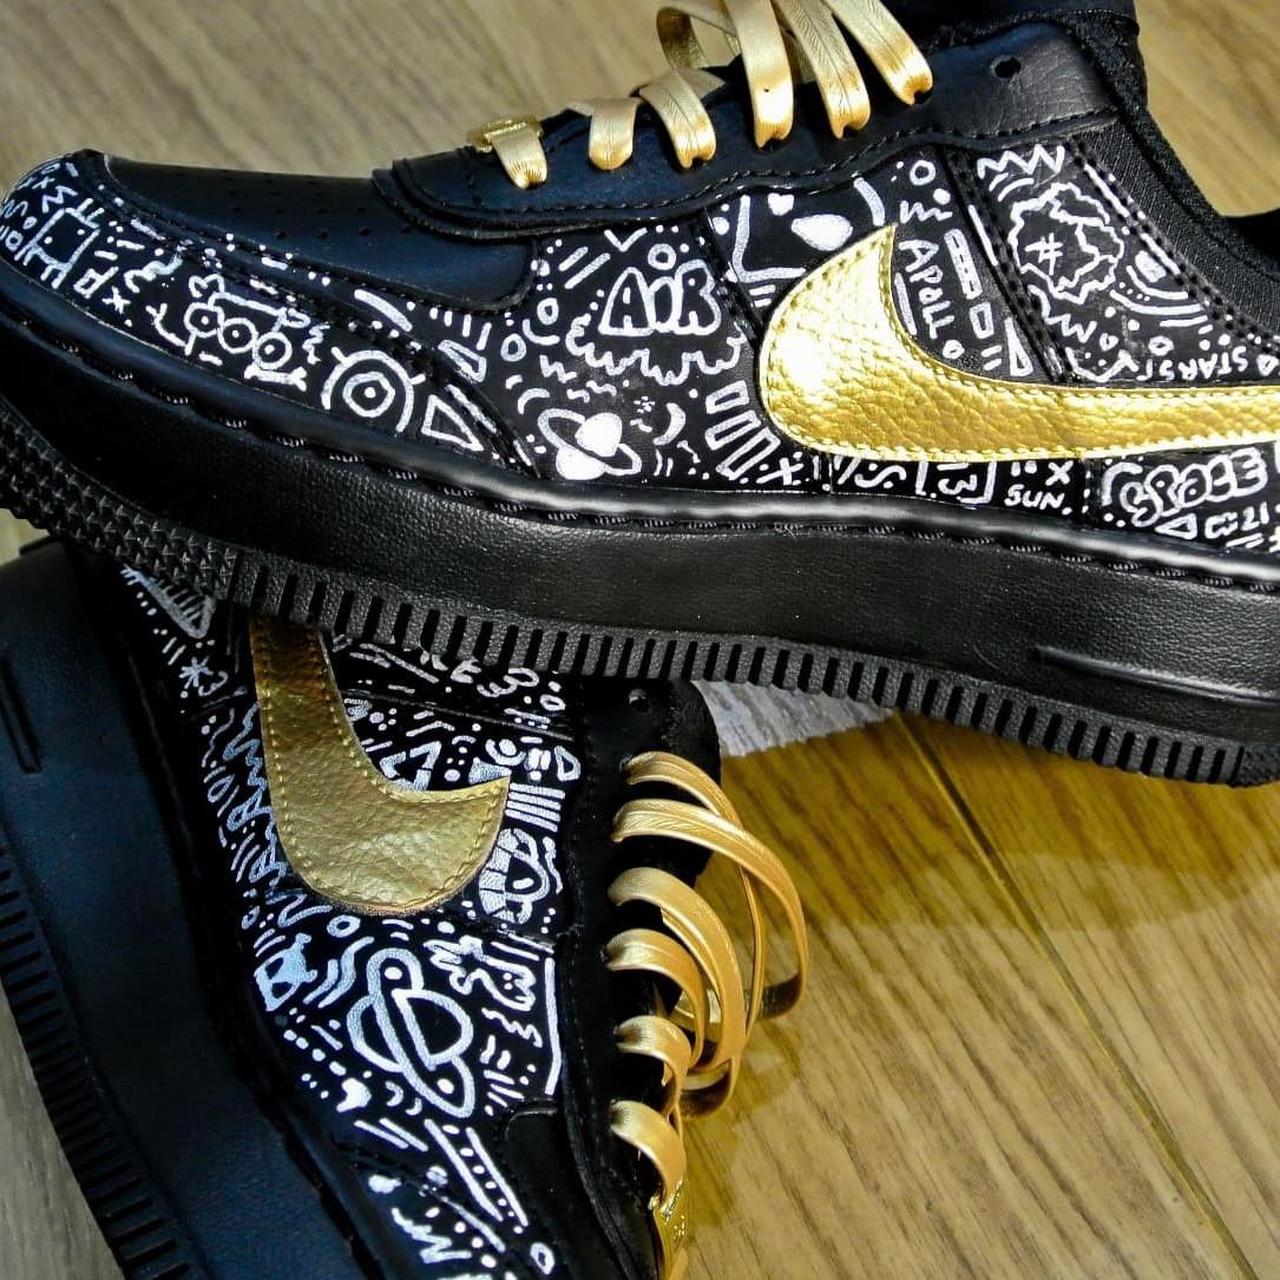 Custom Nike Air Force 1 with white doodles and gold